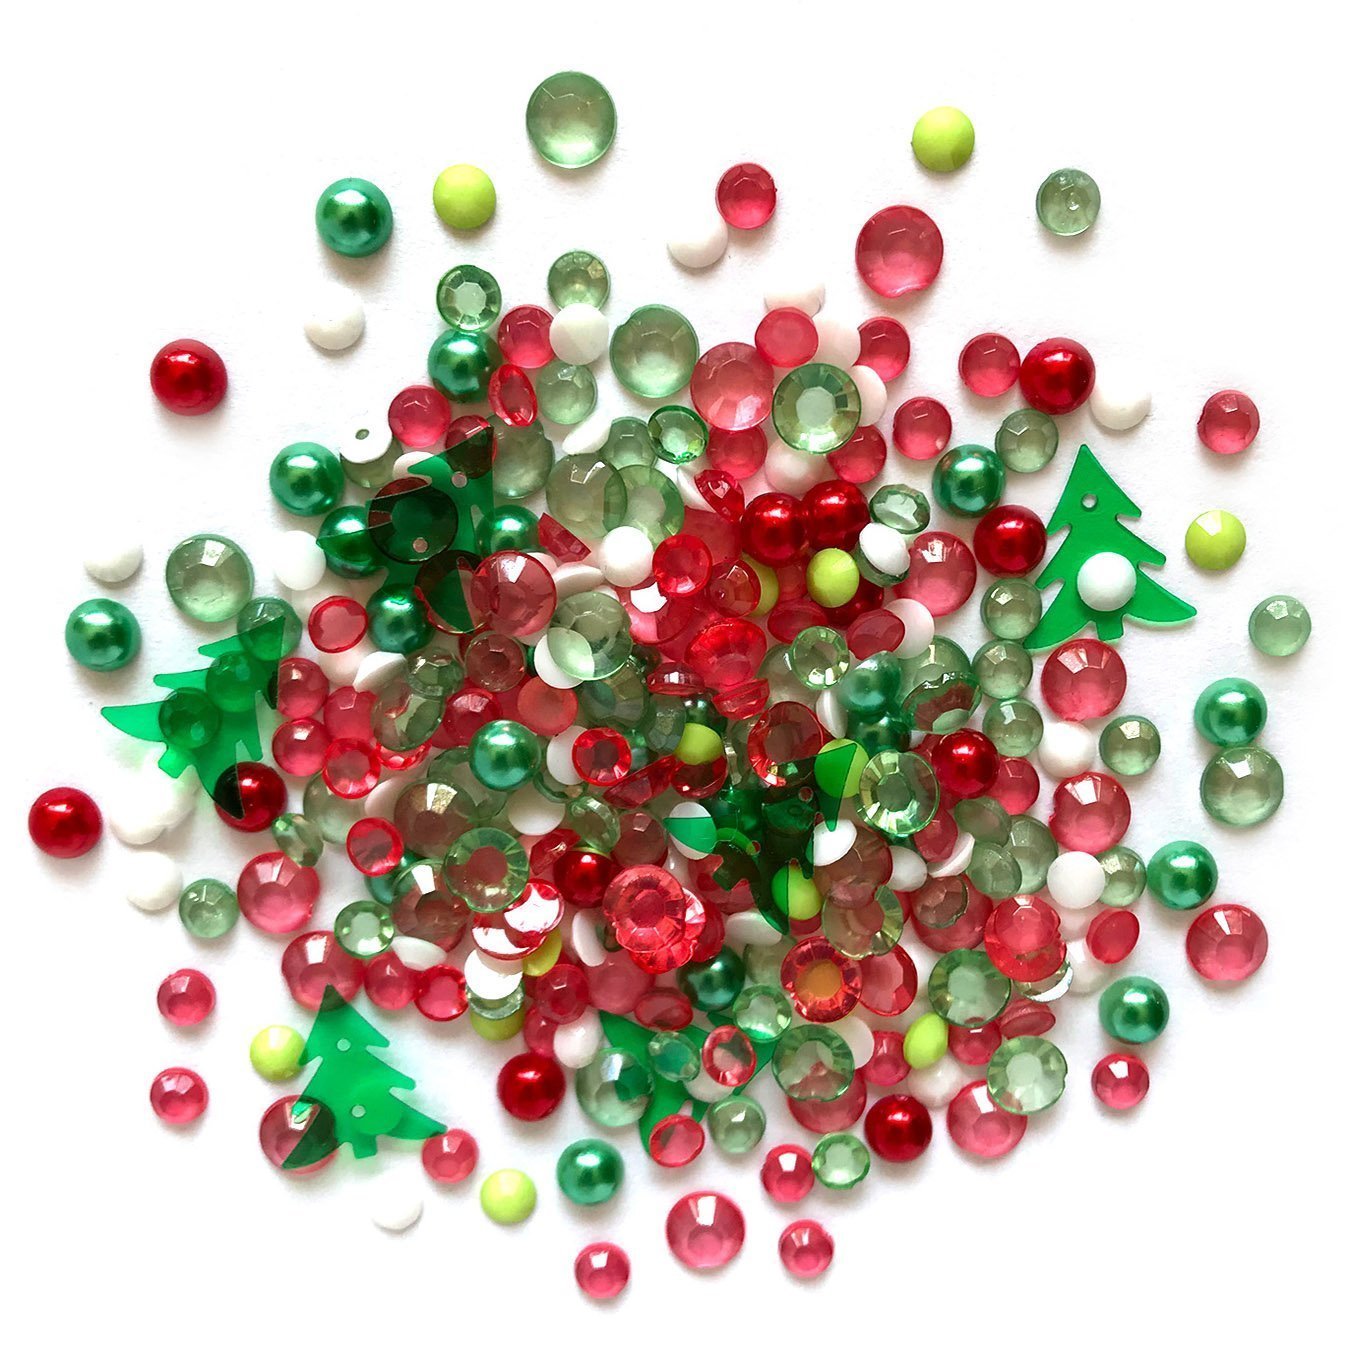 Christmas Bundle - Buttons Galore and More